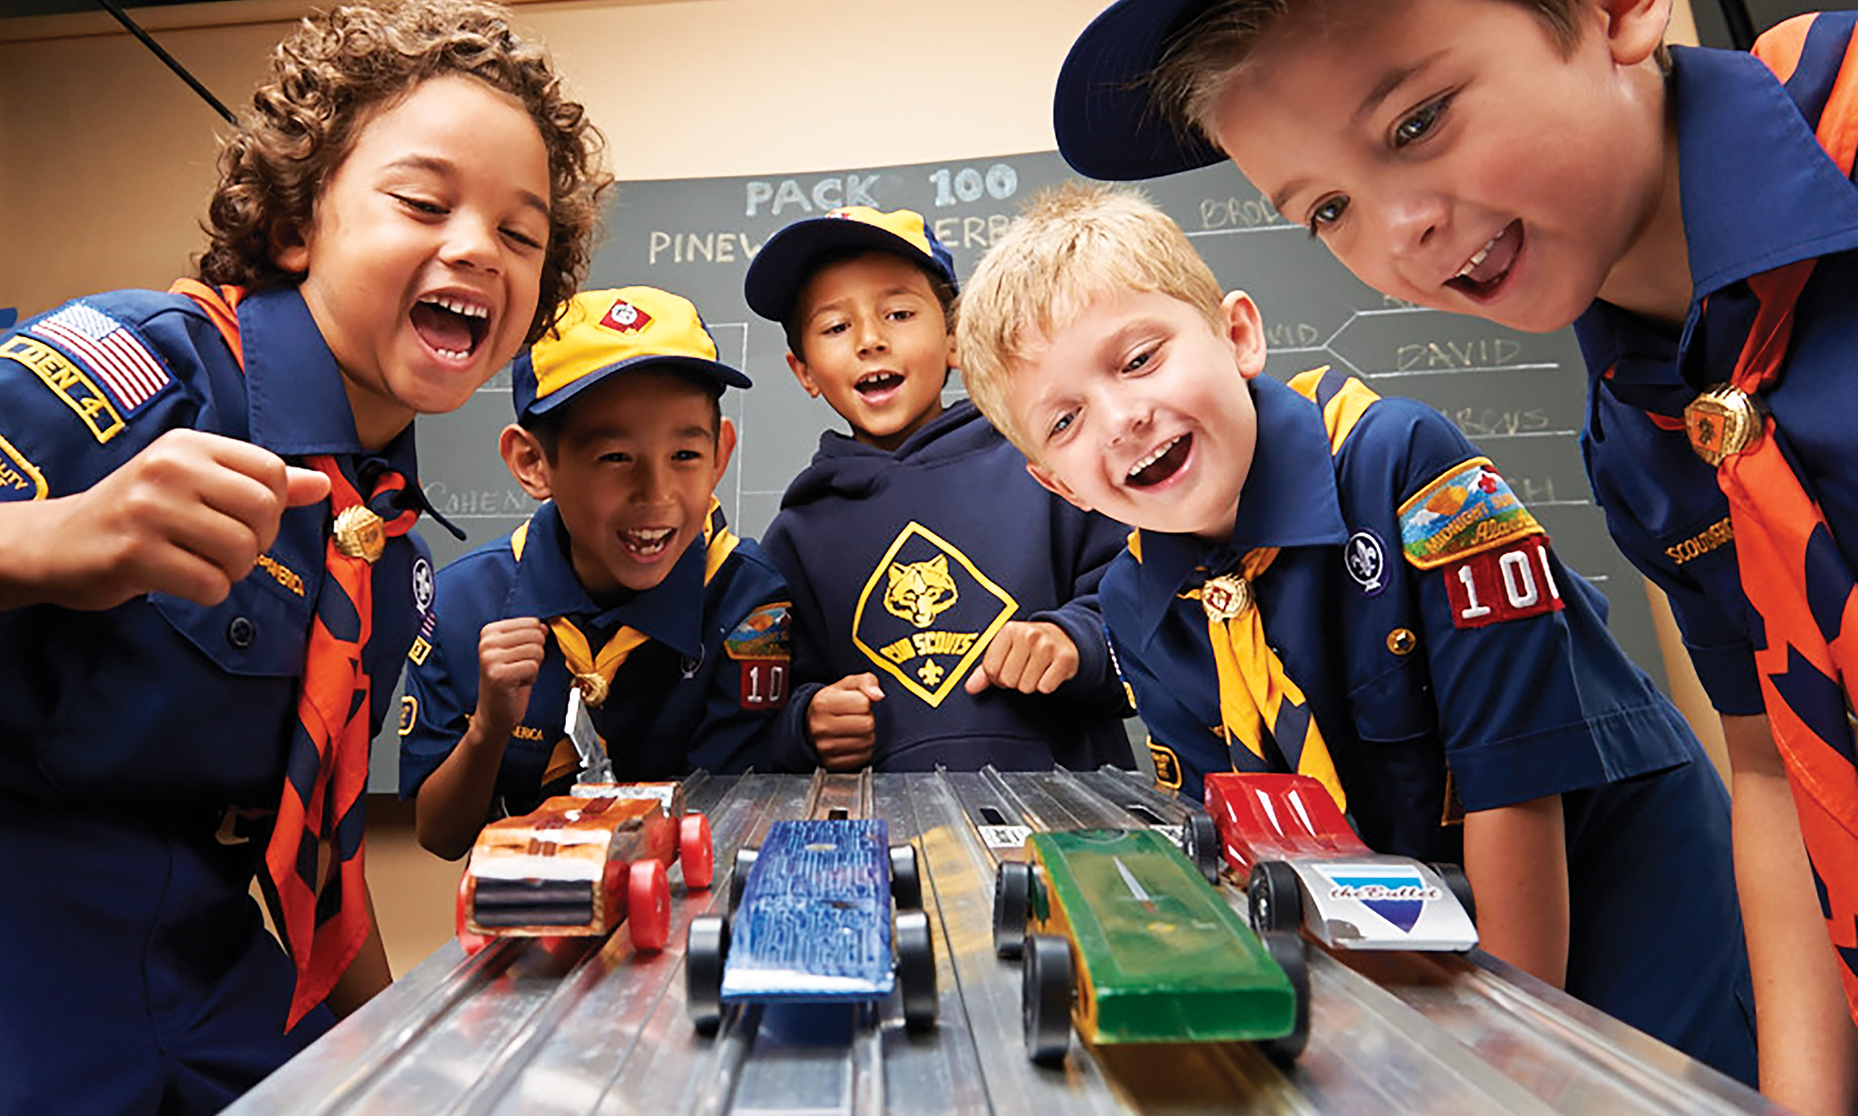 20 tips for planning and hosting the best Pinewood Derby